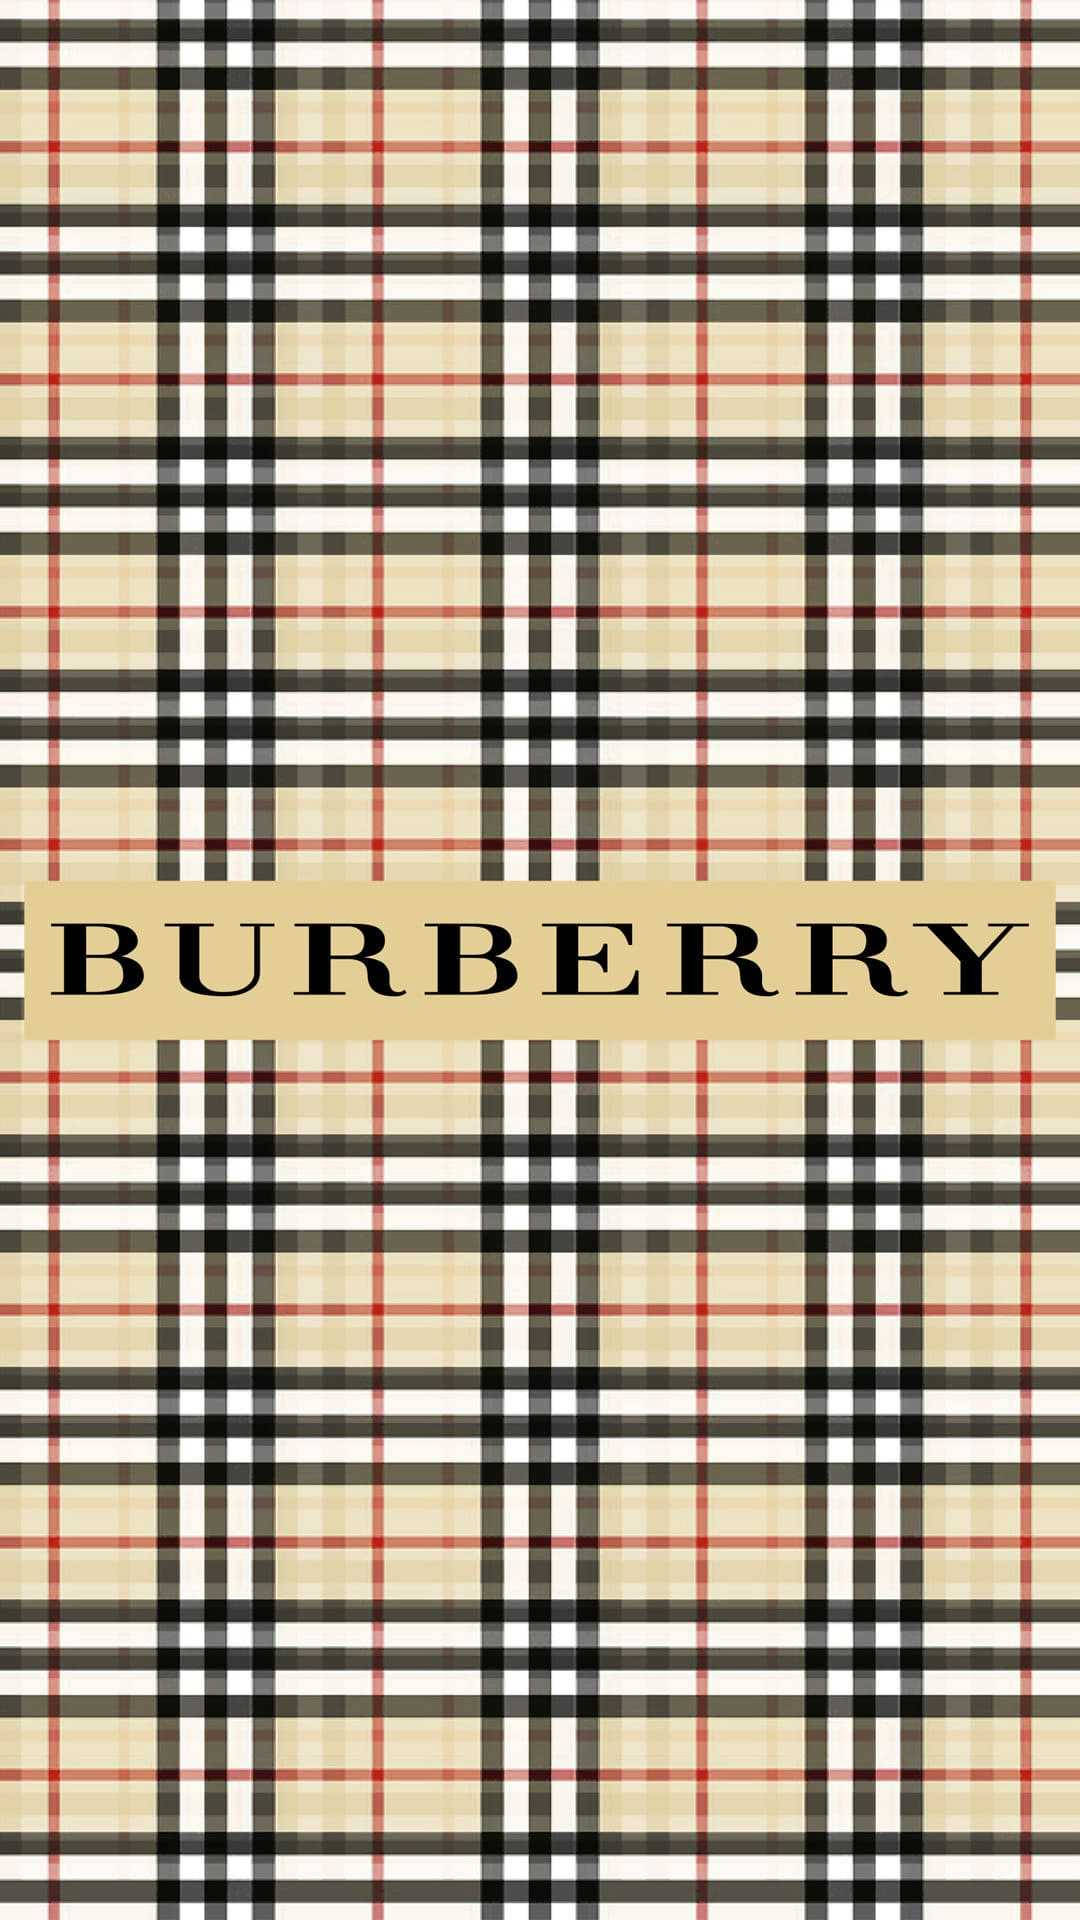 41 Burberry Wallpapers & Backgrounds